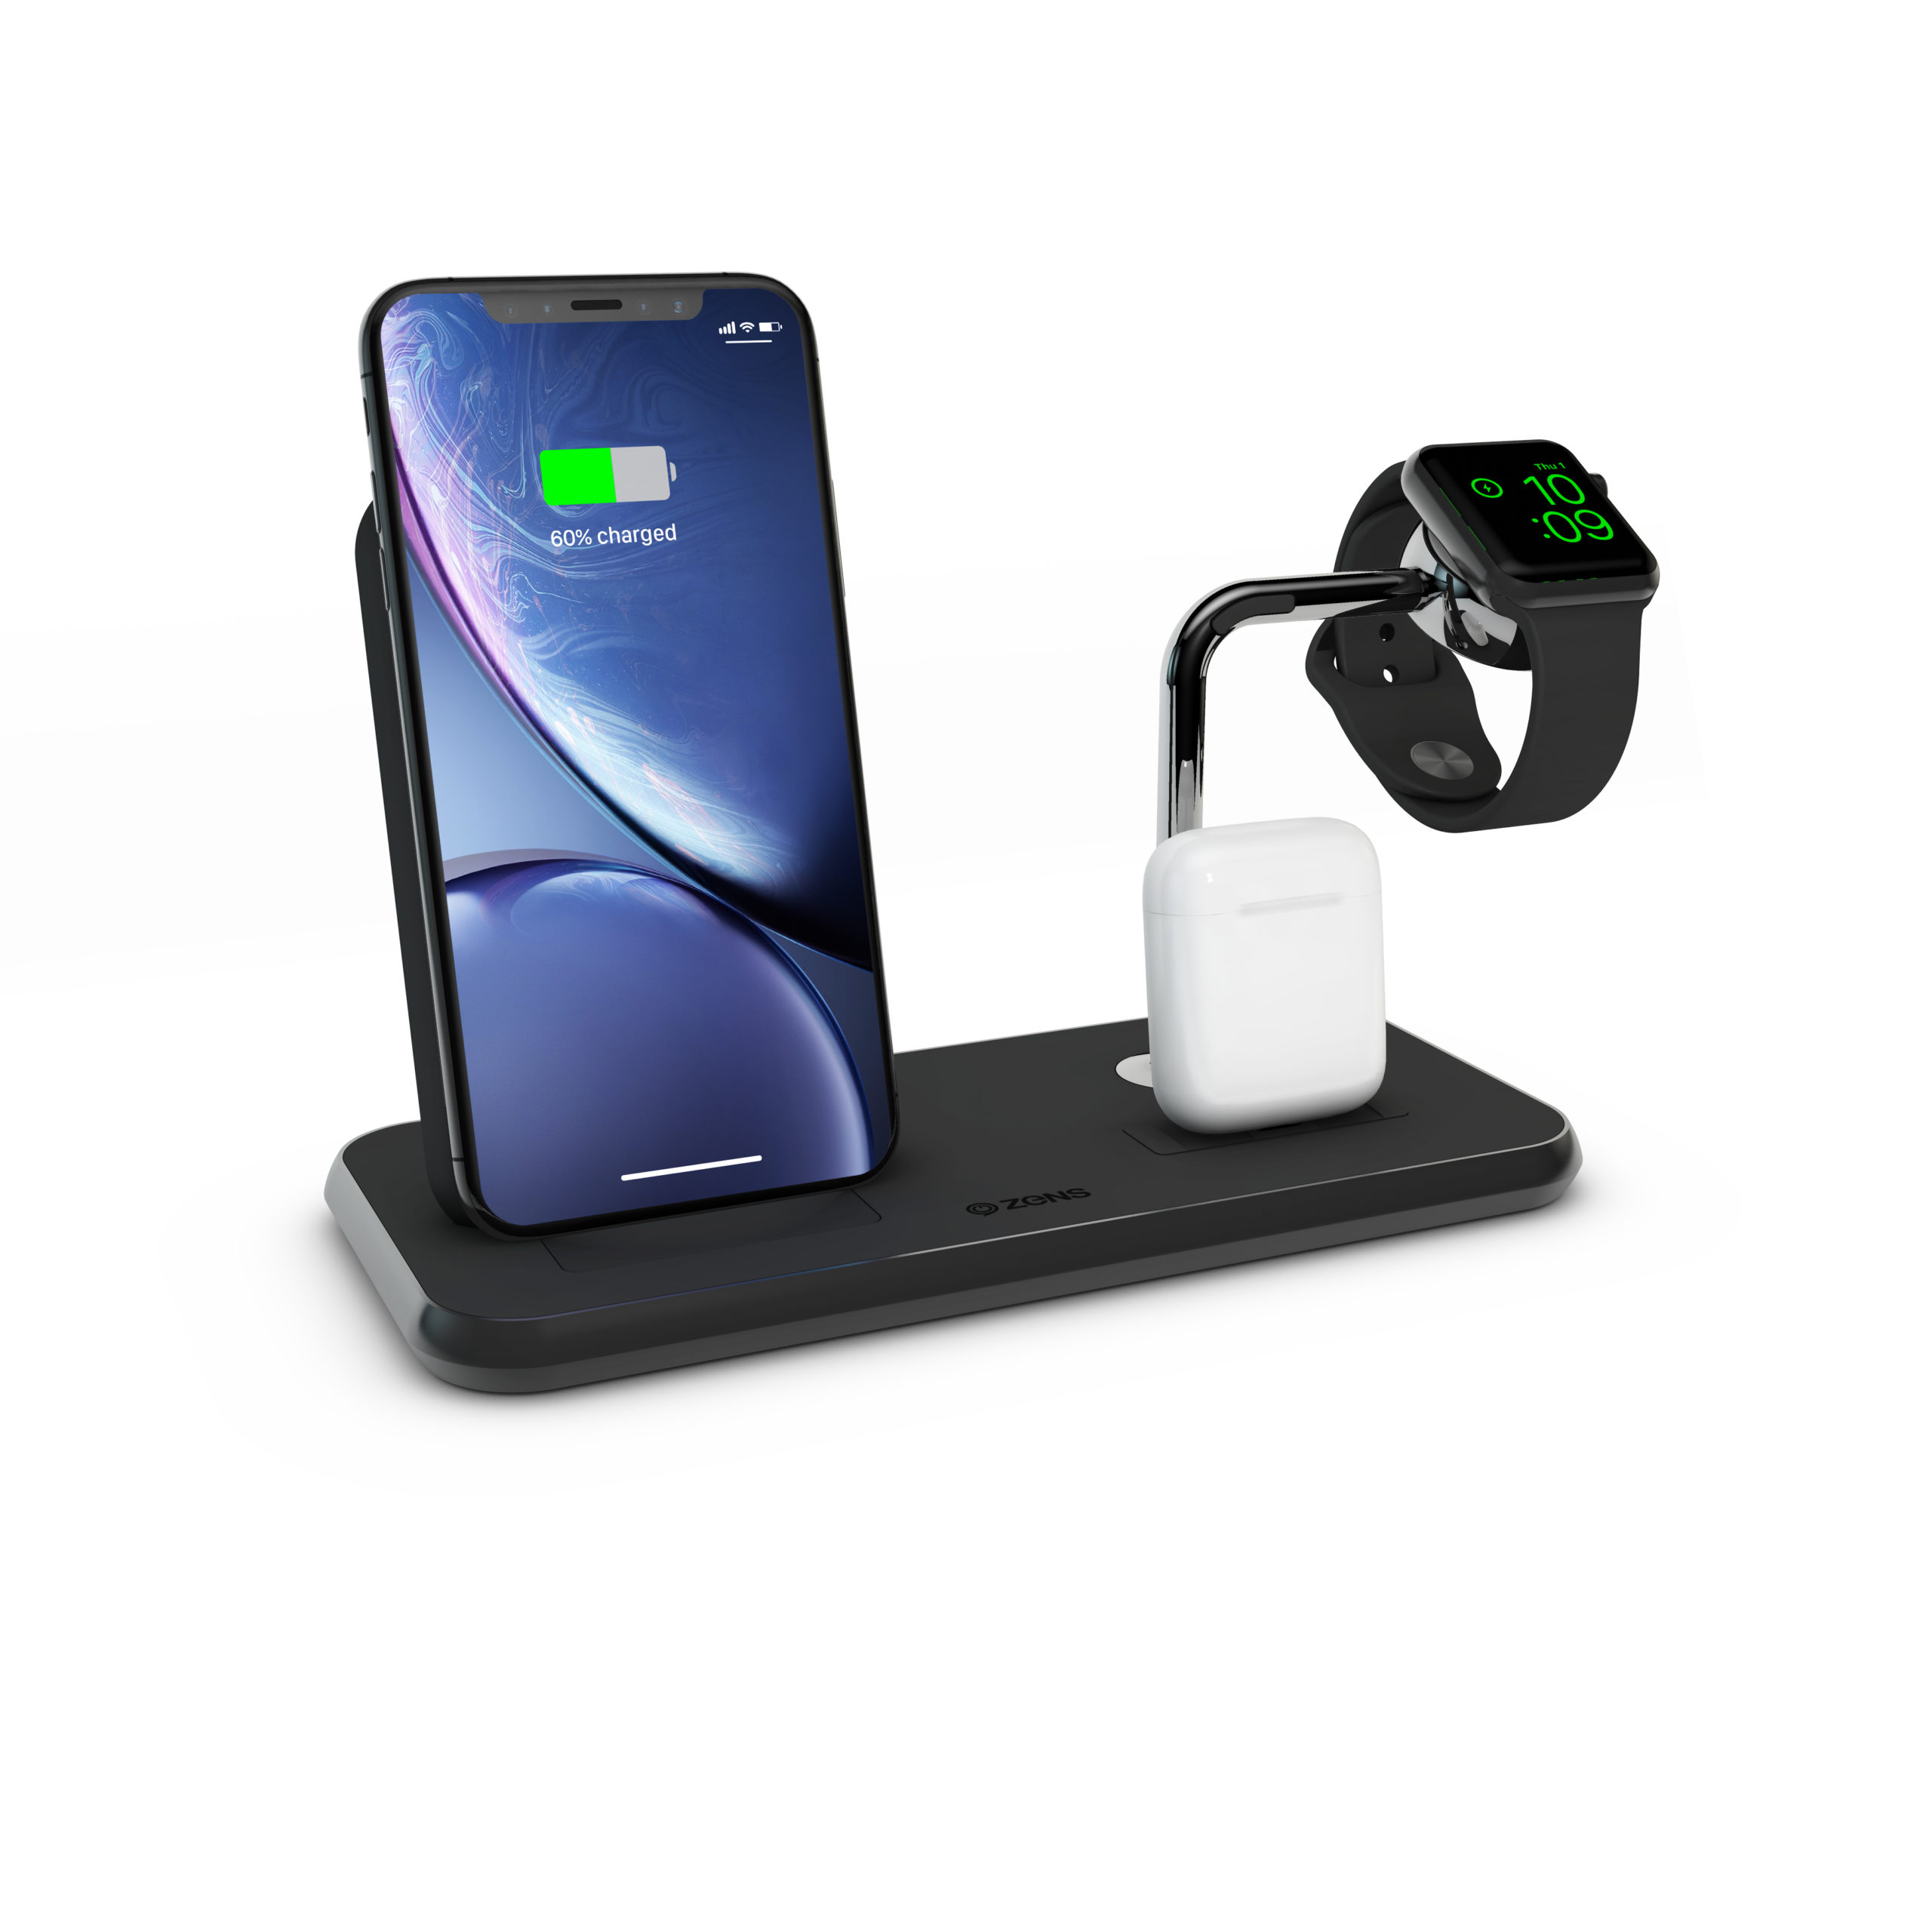 ZEDC07B StandDockWatch Aluminium Wireless Charger Black with Apple Watch iPhone and AirPods